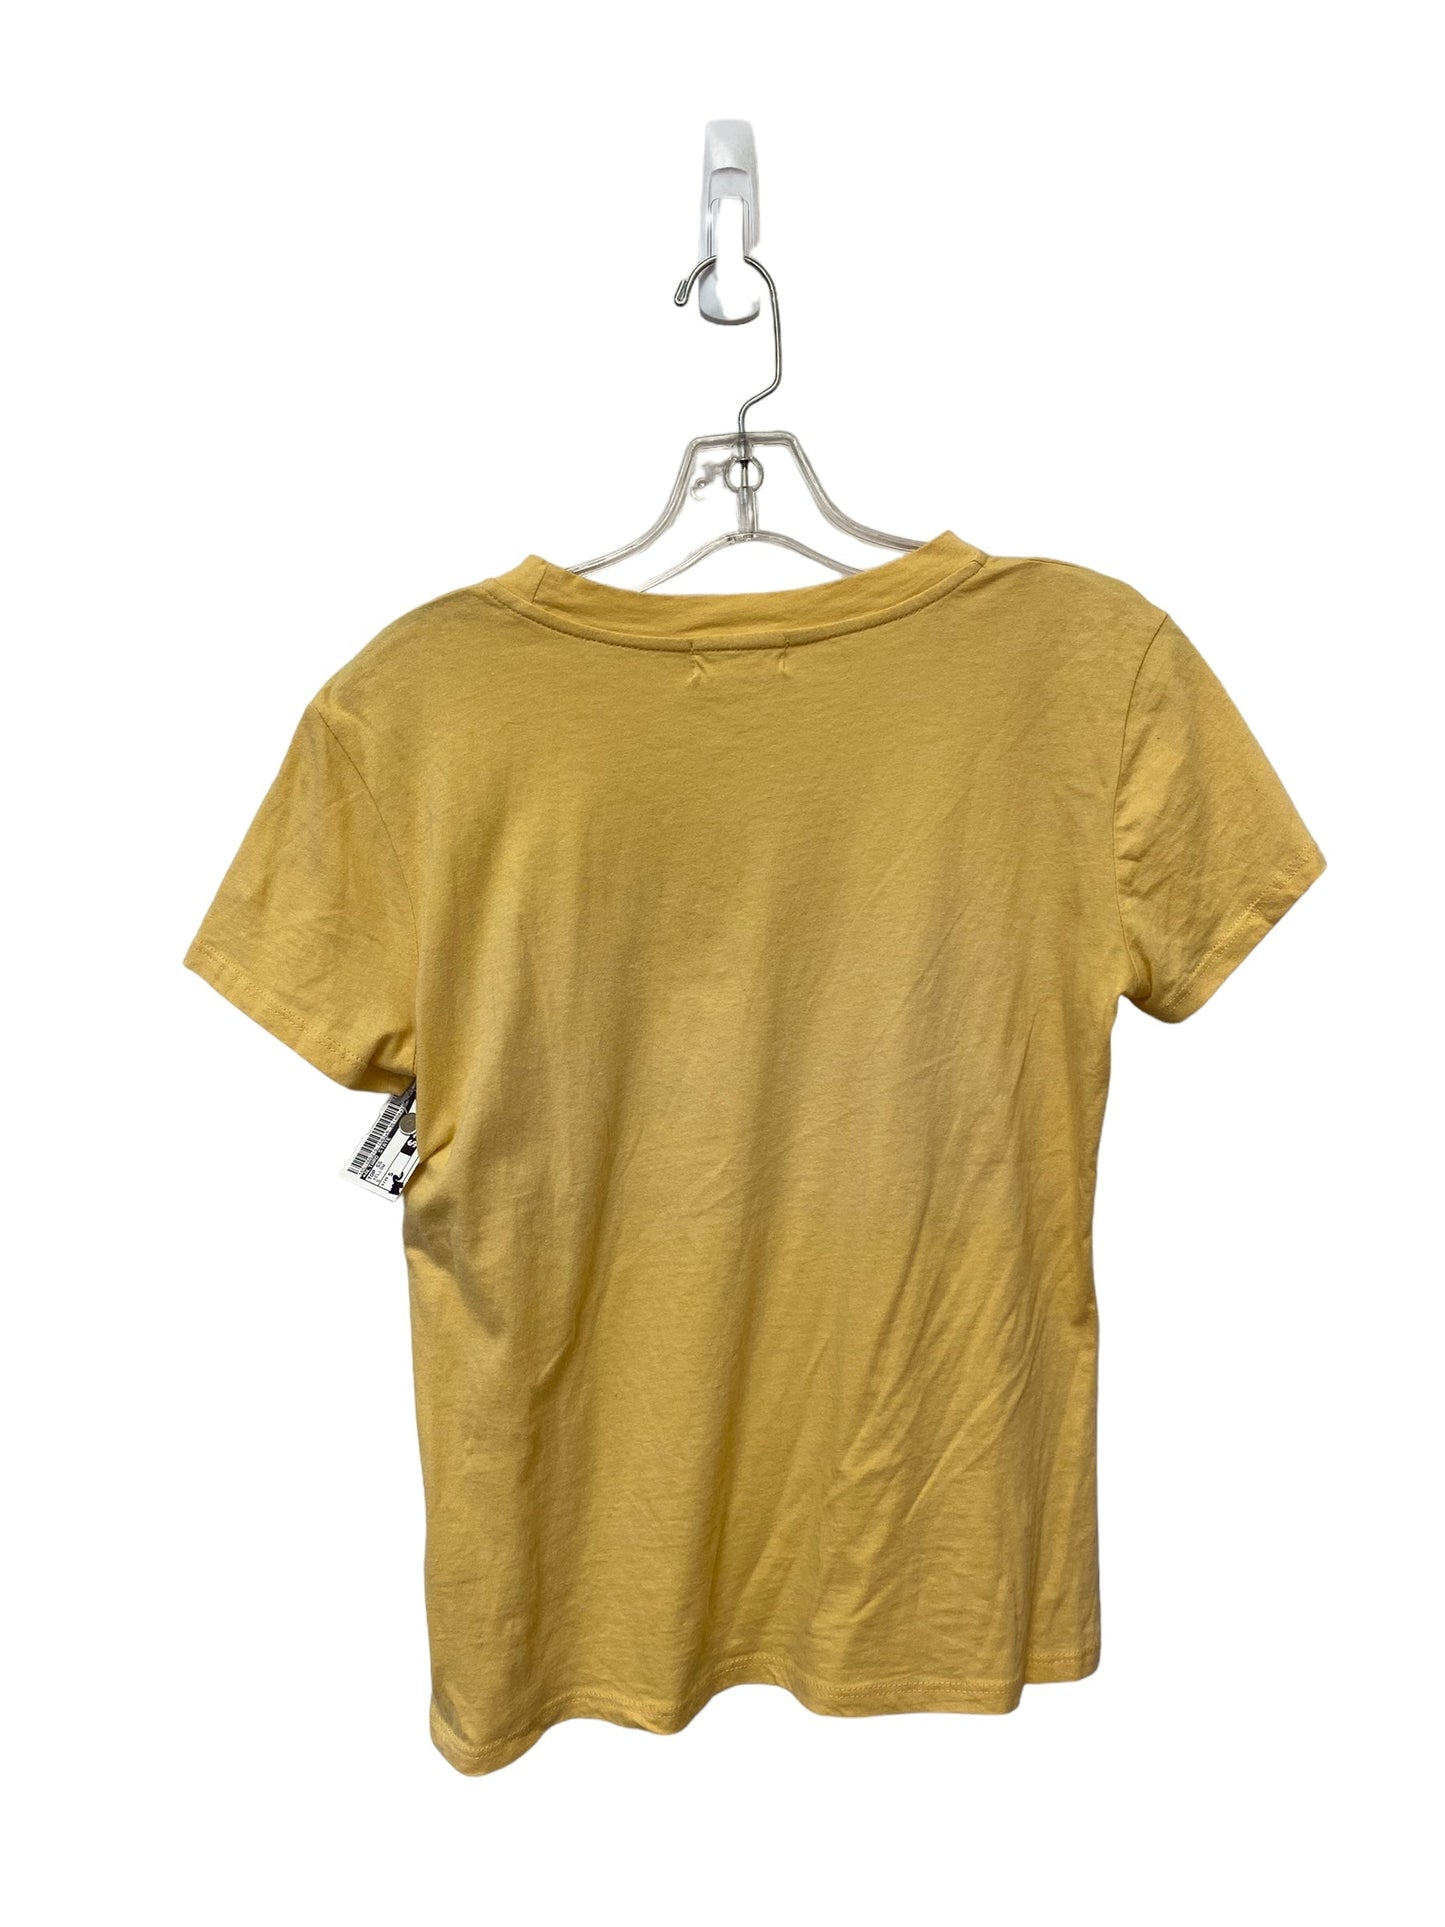 Yellow Top Short Sleeve Altard State, Size S